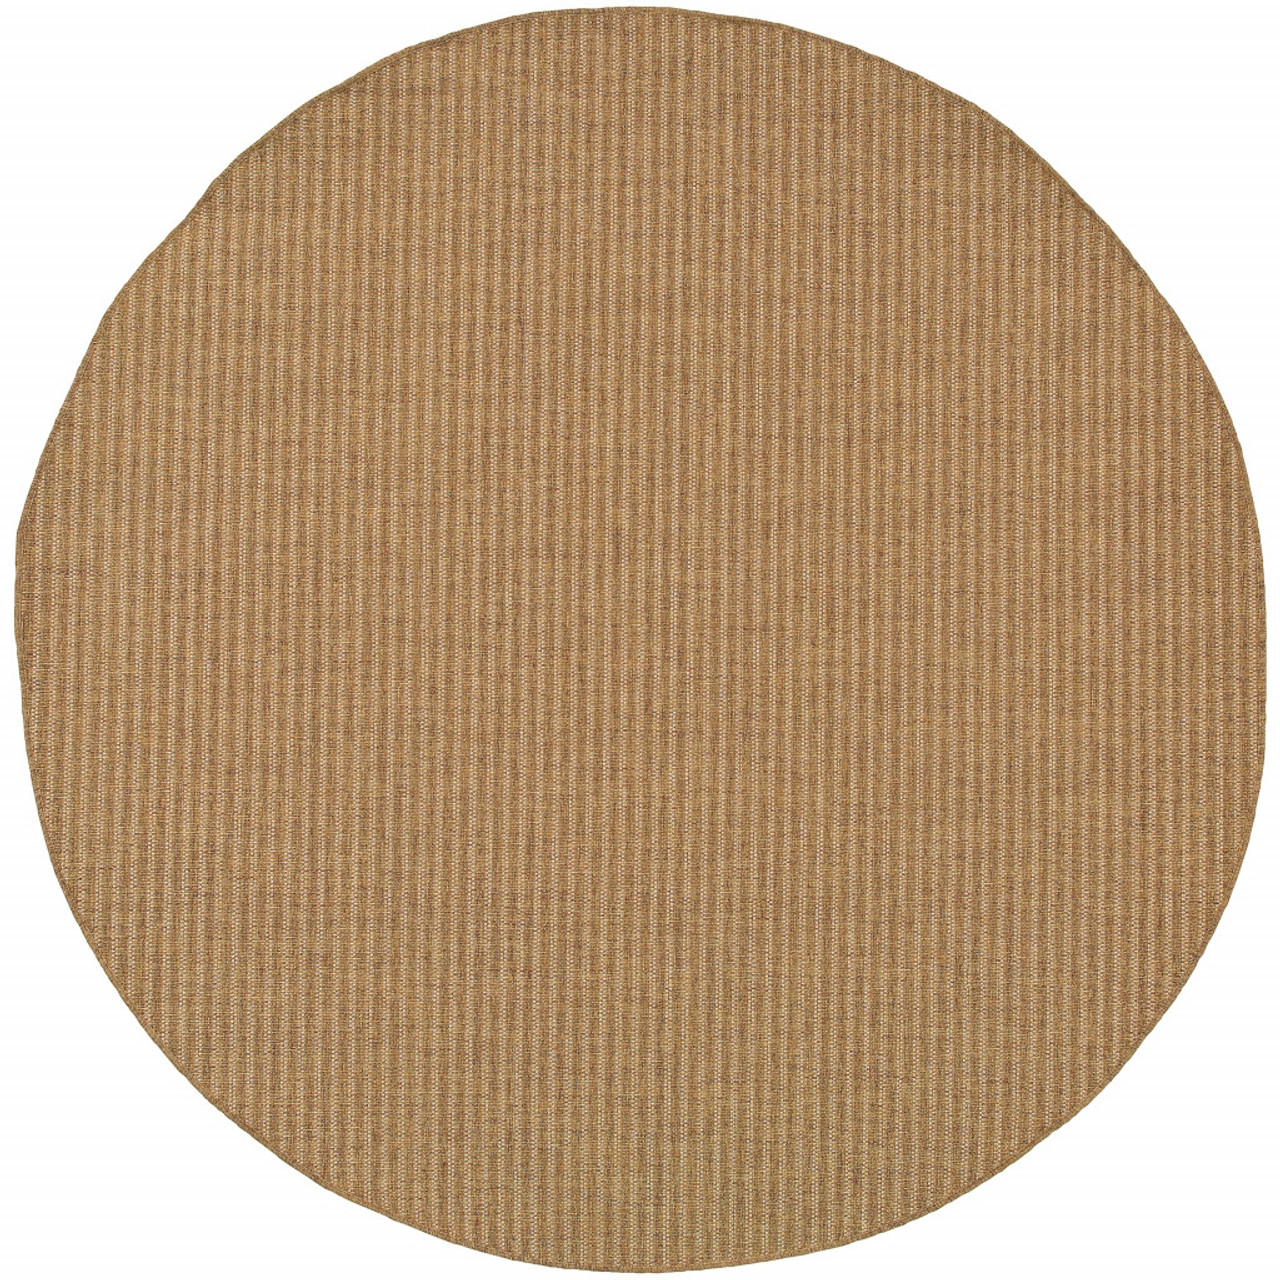 8' Tan Round Striped Stain Resistant Indoor Outdoor Area Rug